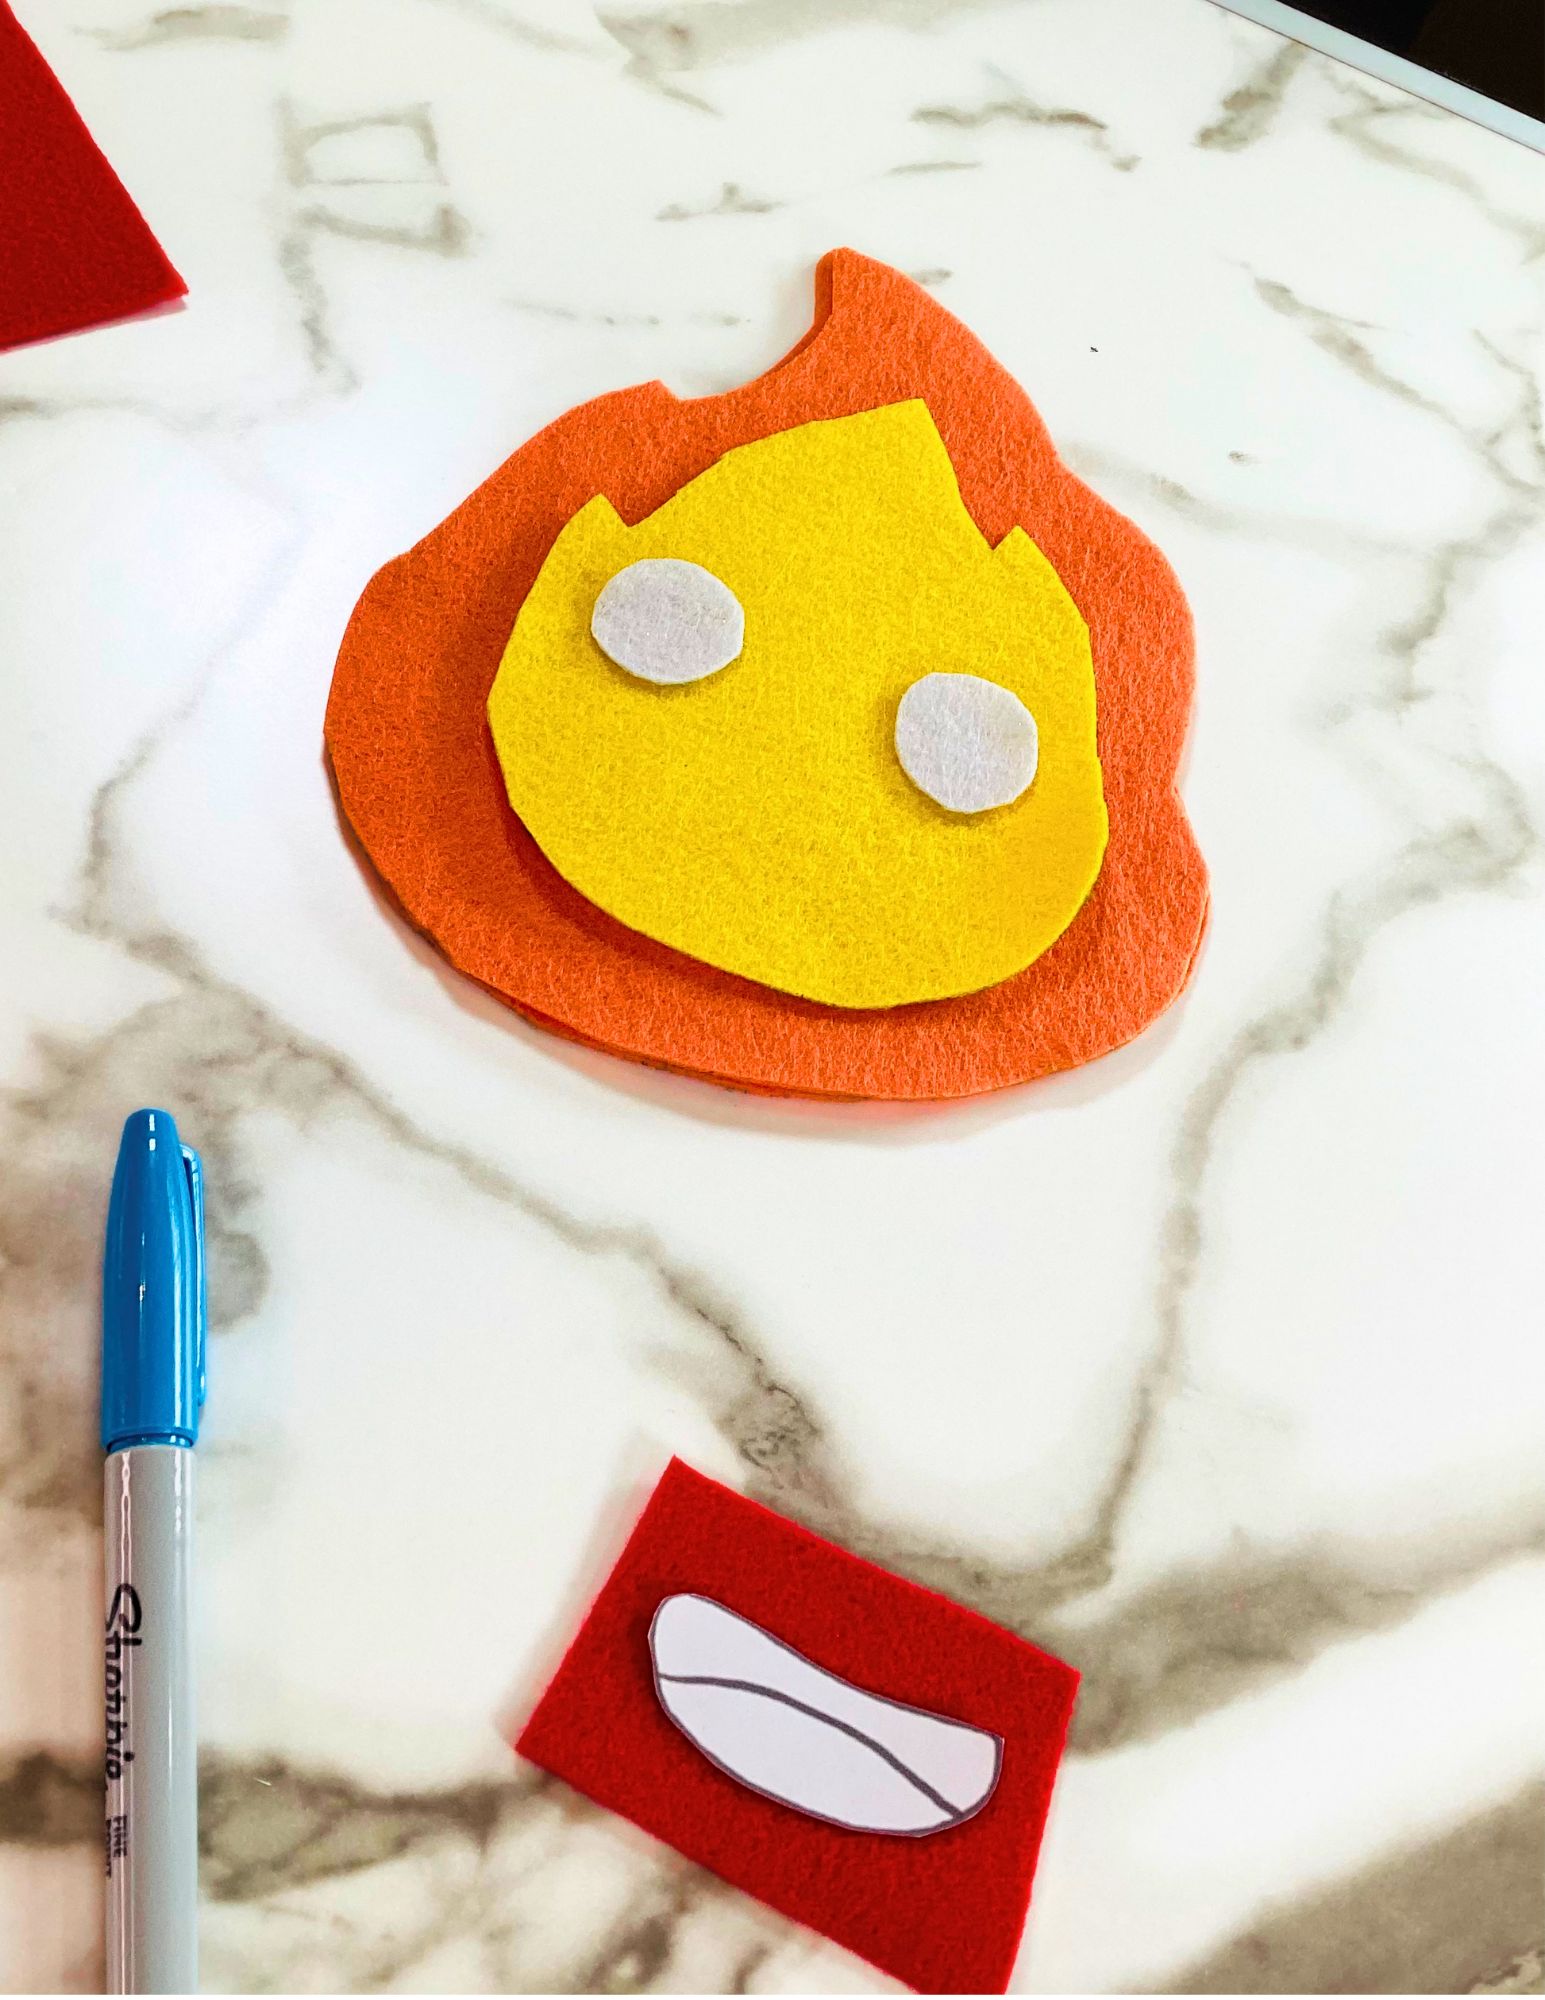 eyes and mouth being cut out for DIY Howl's Moving castle plushie